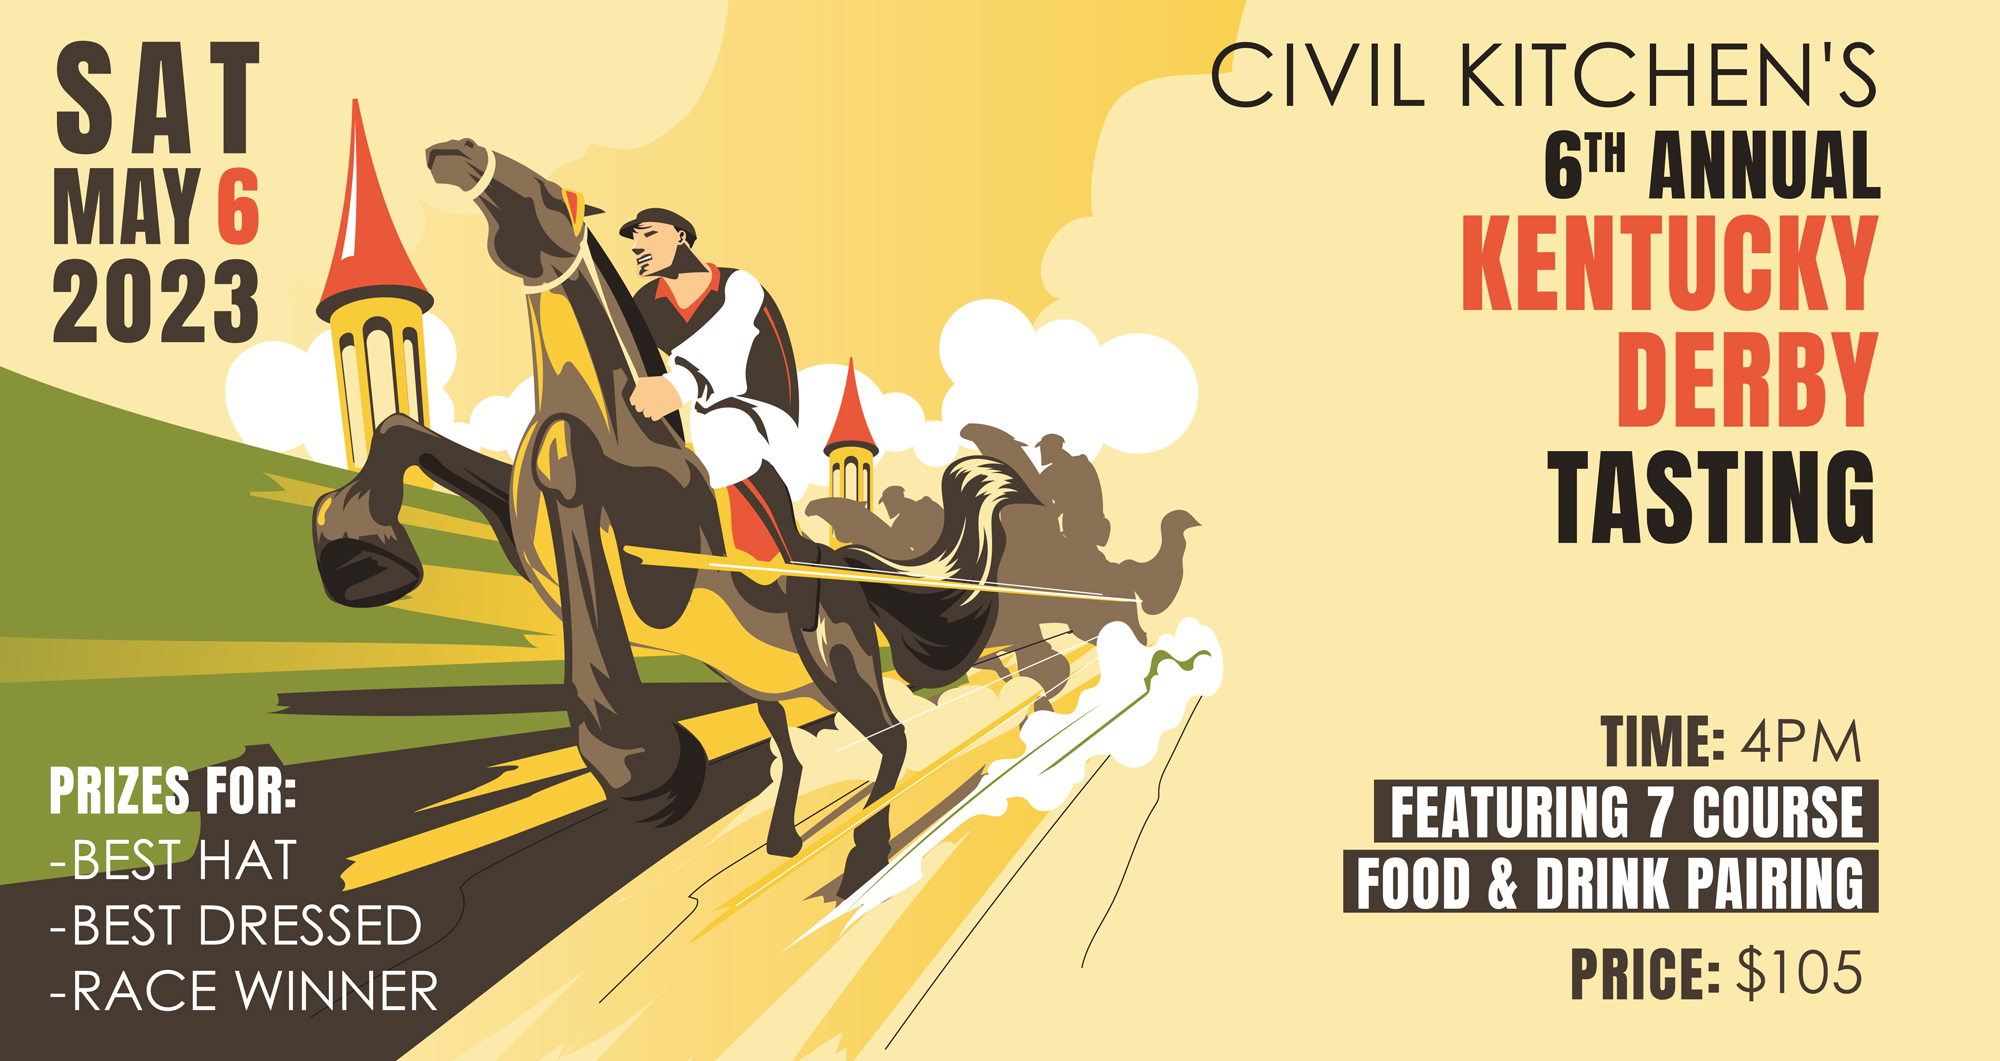 6th Annual Kentucky Derby Tasting at Civil Kitchen!